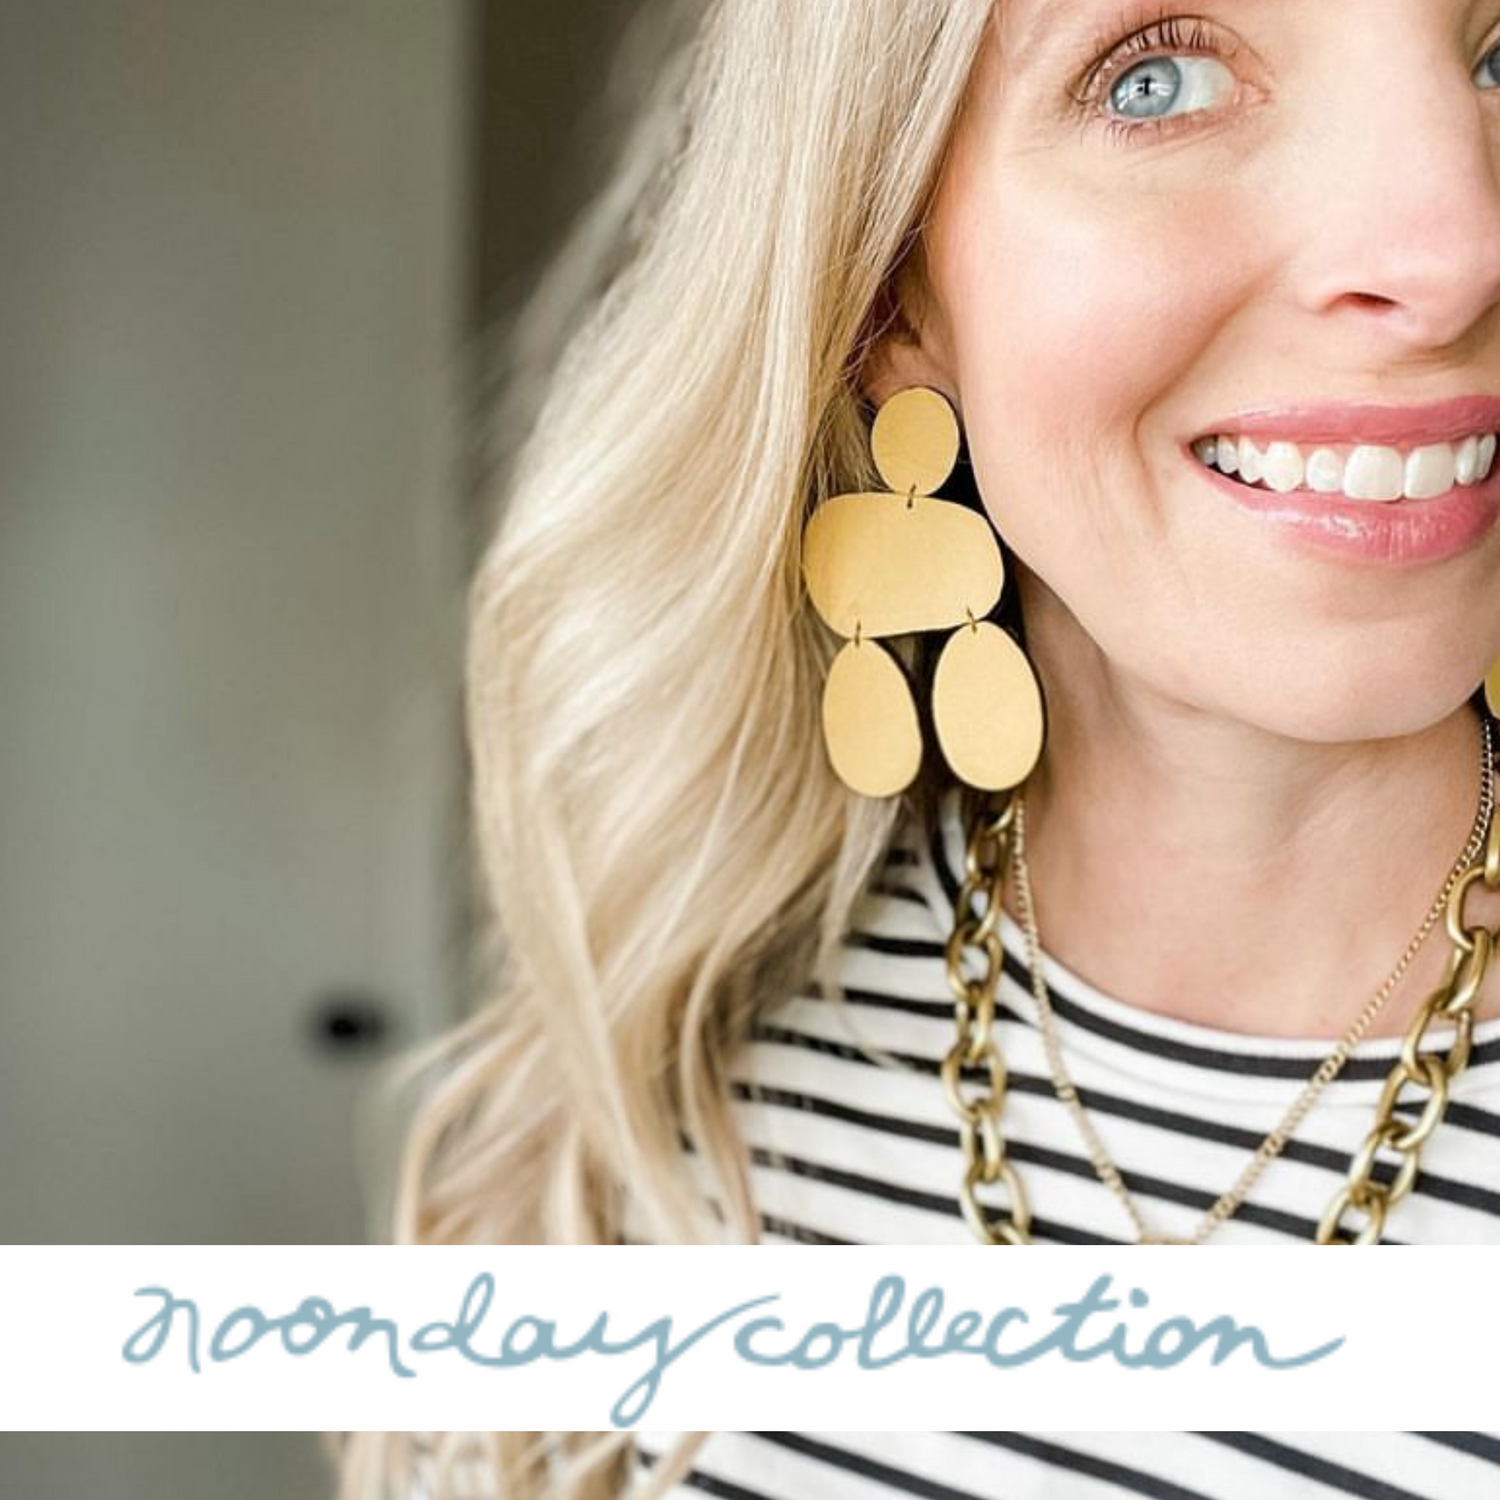 Purposeful Fashion with Ginny and Noonday Collection. She donated pieces for me to wear in my self publishing YouTube video. 